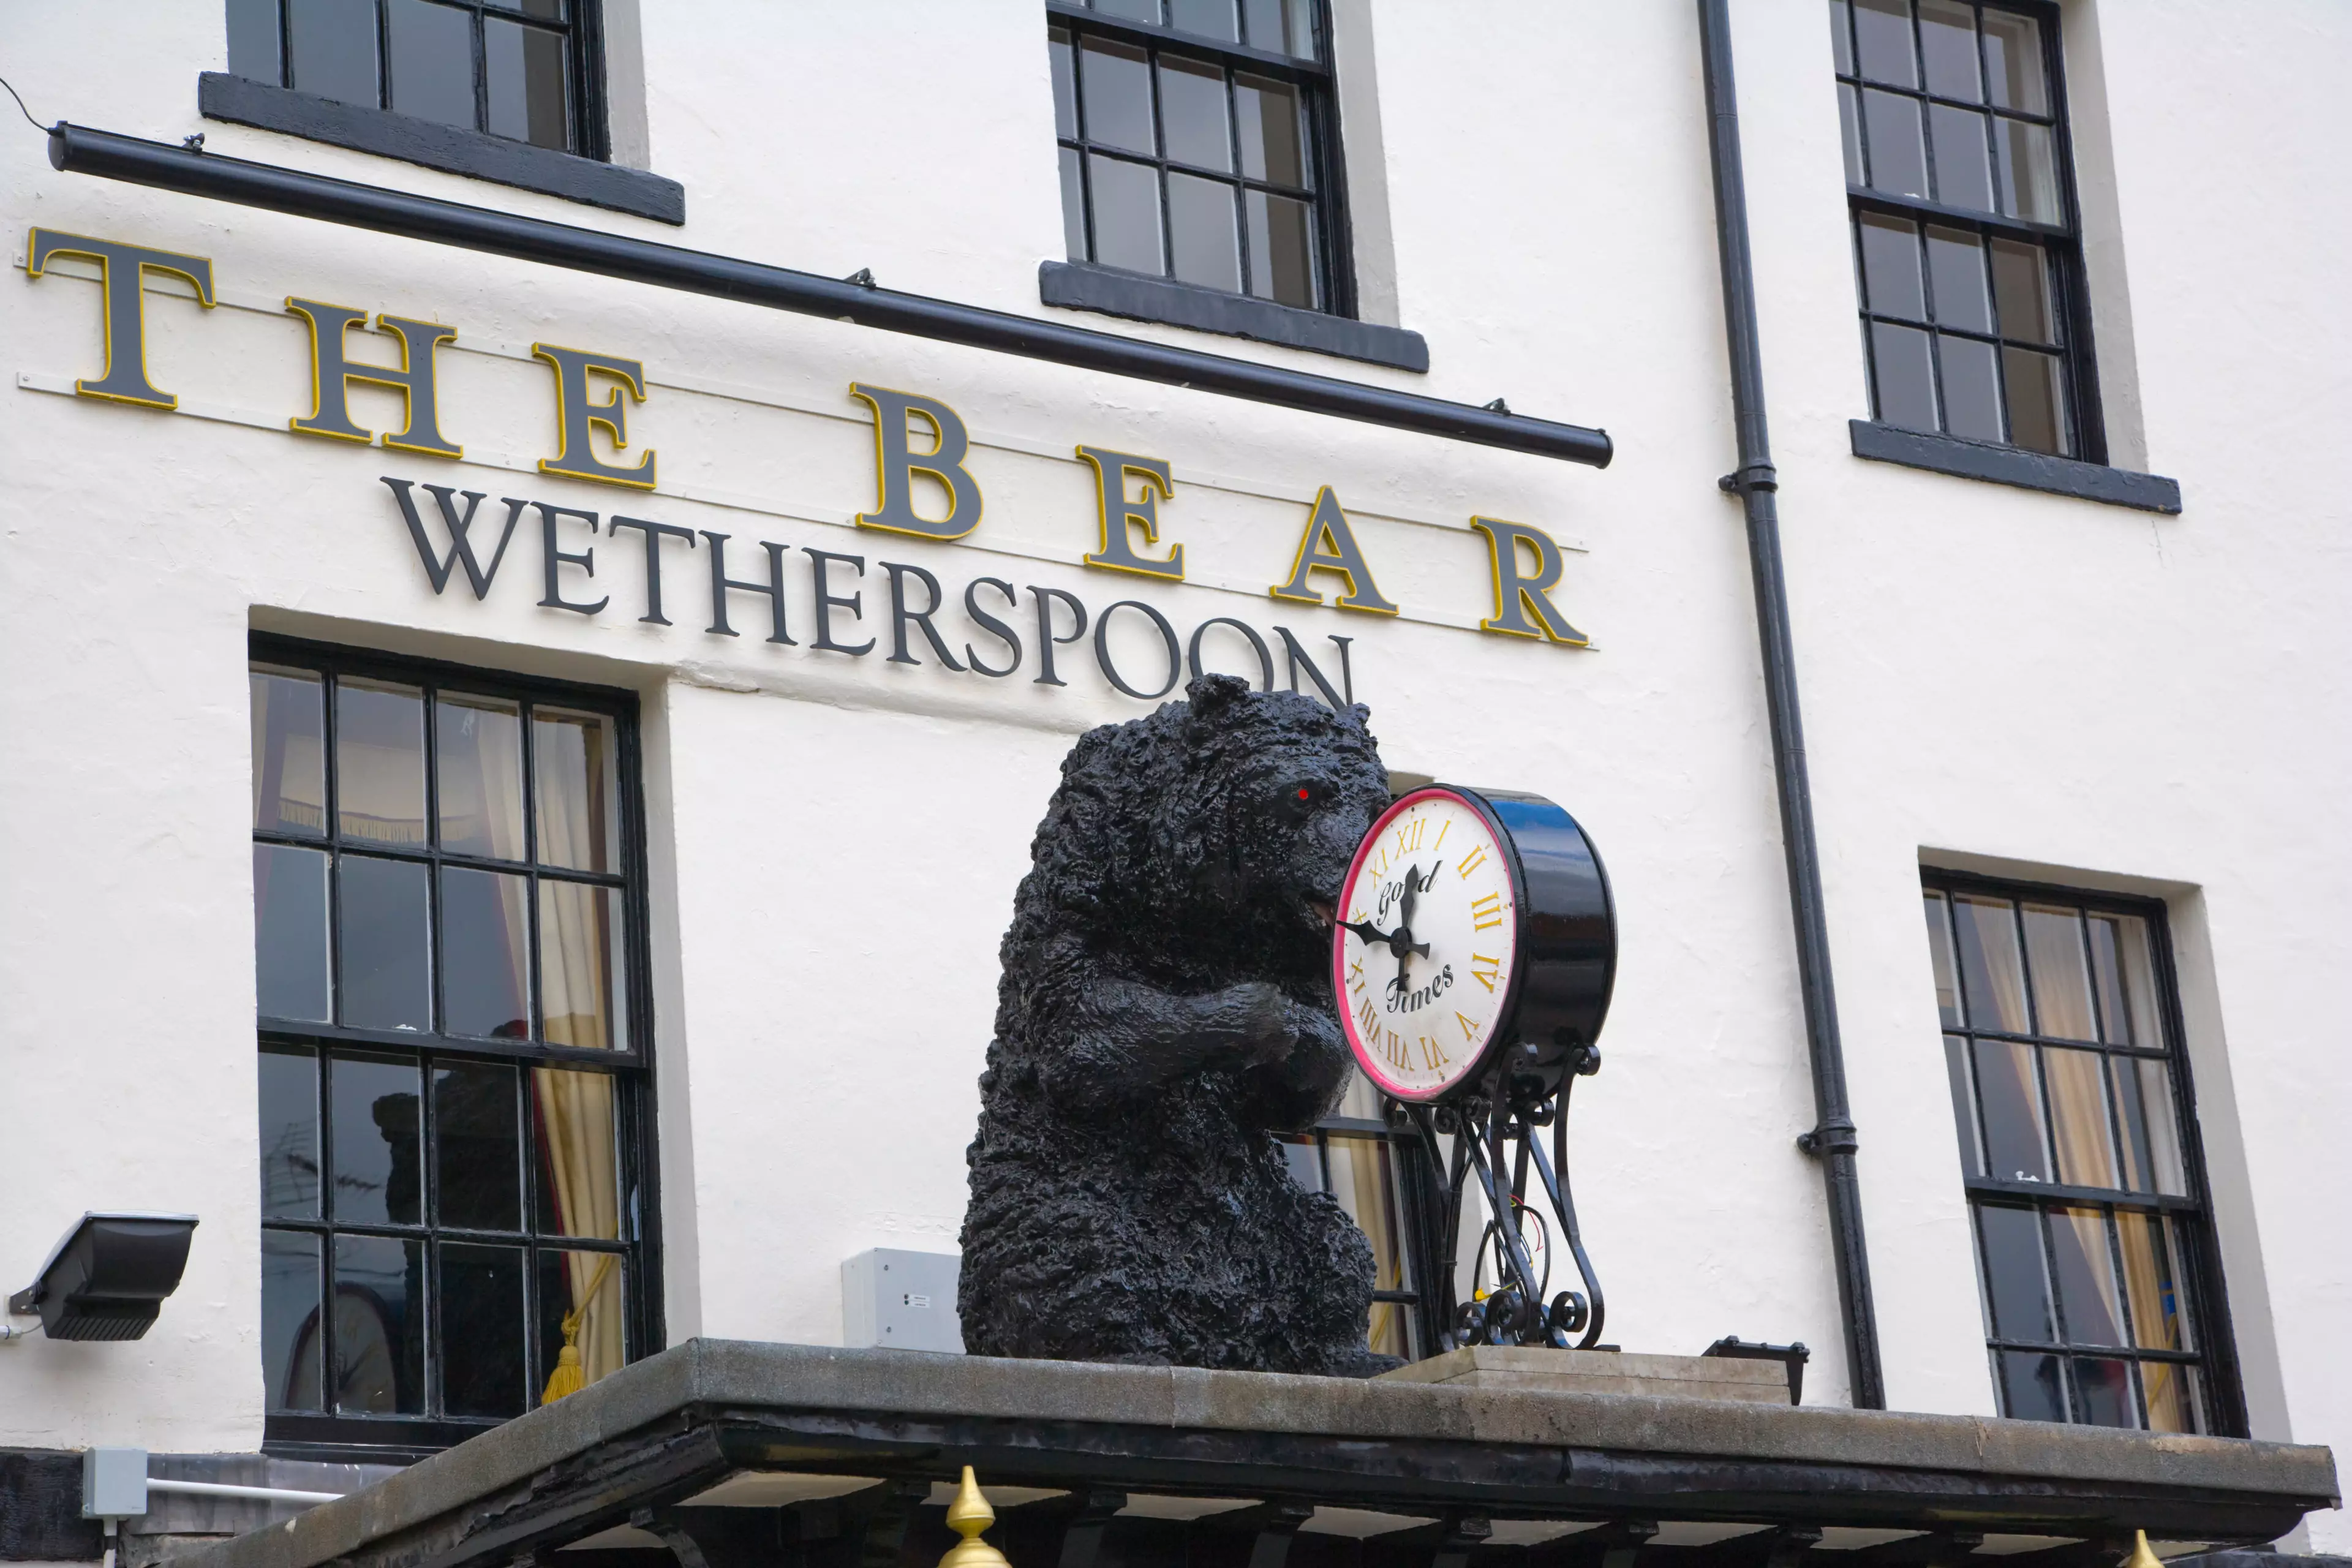 The bizarre incident took place at The Bear in Maidenhead, Berkshire.